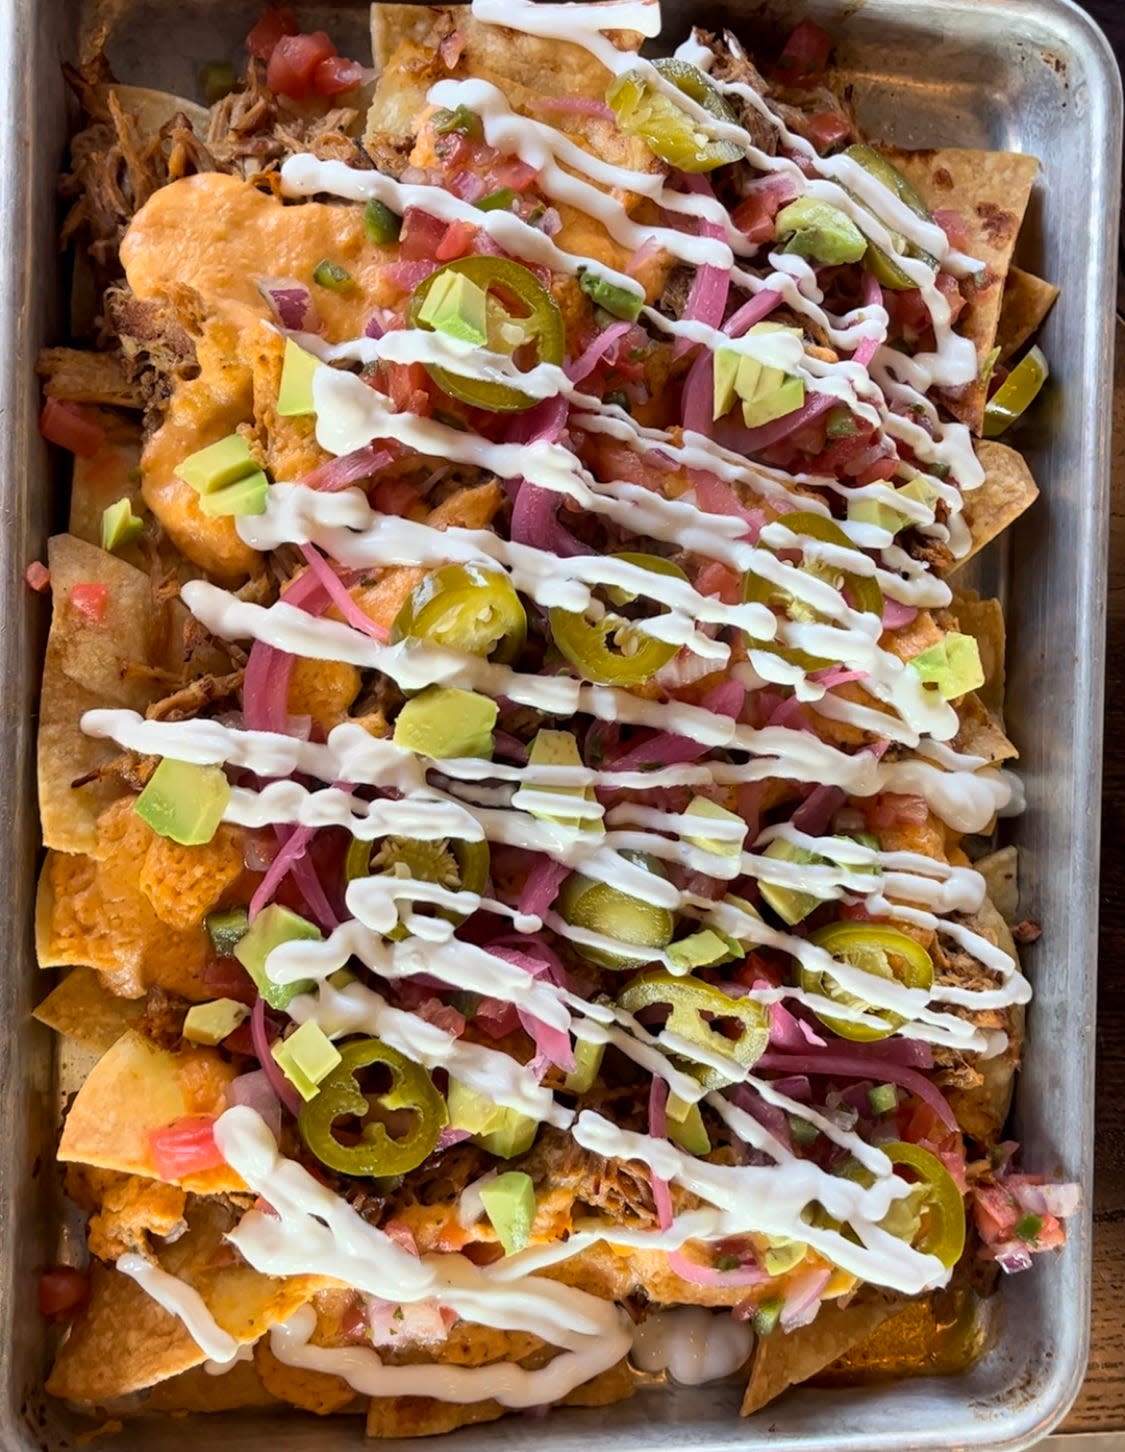 Cask Southern Kitchen & Bar, 9980 Linn Station Road, offers appetizers such as pulled pork nachos, fried green tomatoes and spicy smoked wings.